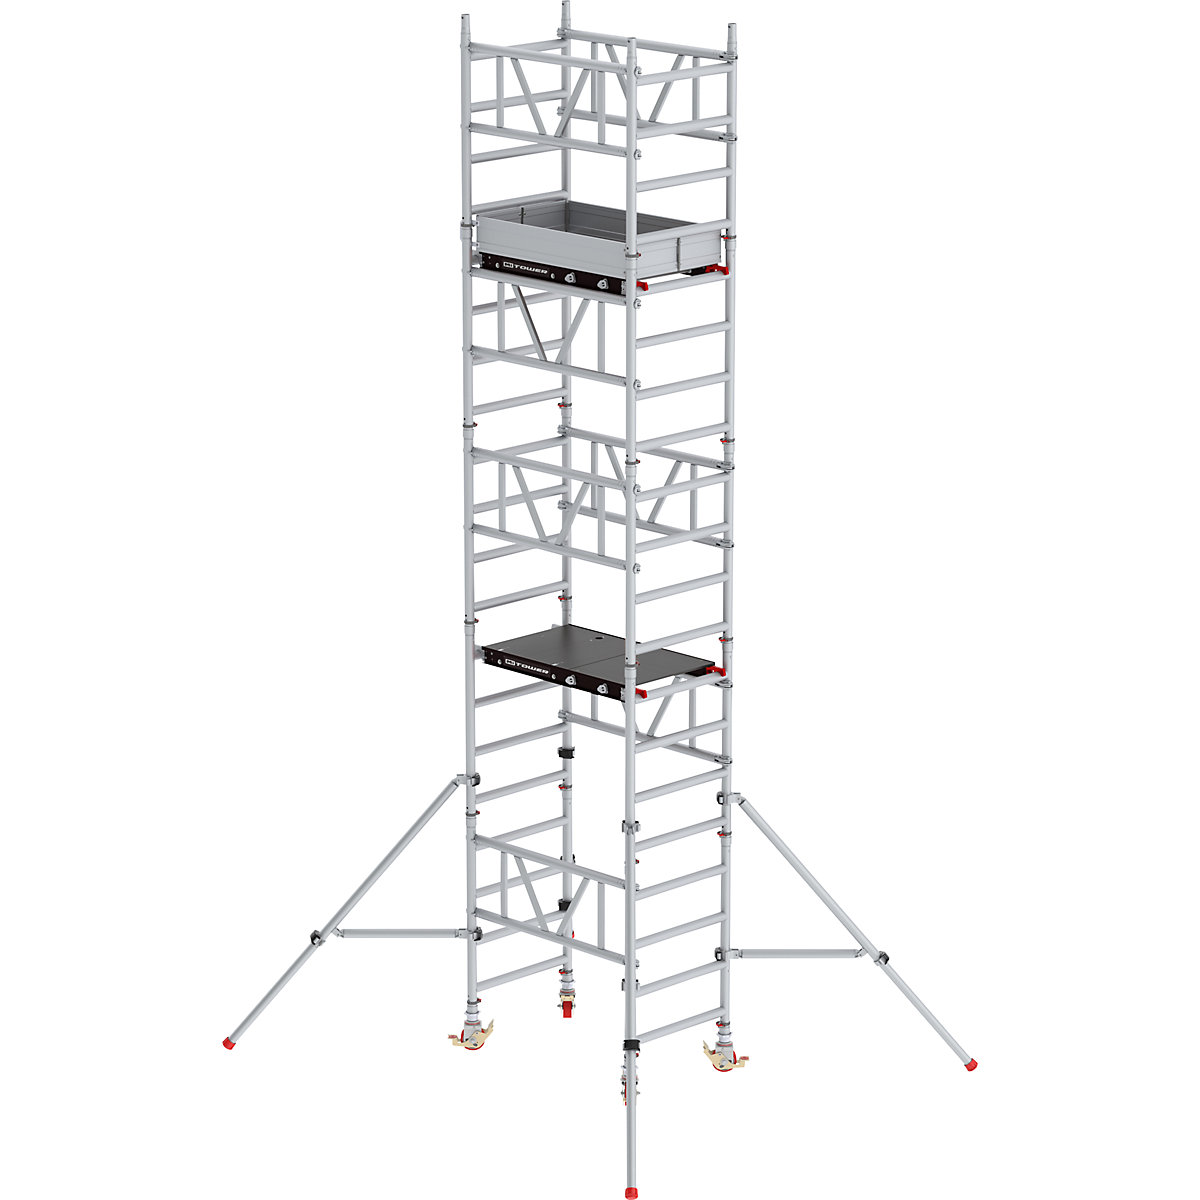 Standard MiTOWER quick assembly mobile access tower – Altrex, Fiber-Deck® platform, LxW 1200 x 750 mm, working height 6 m-24